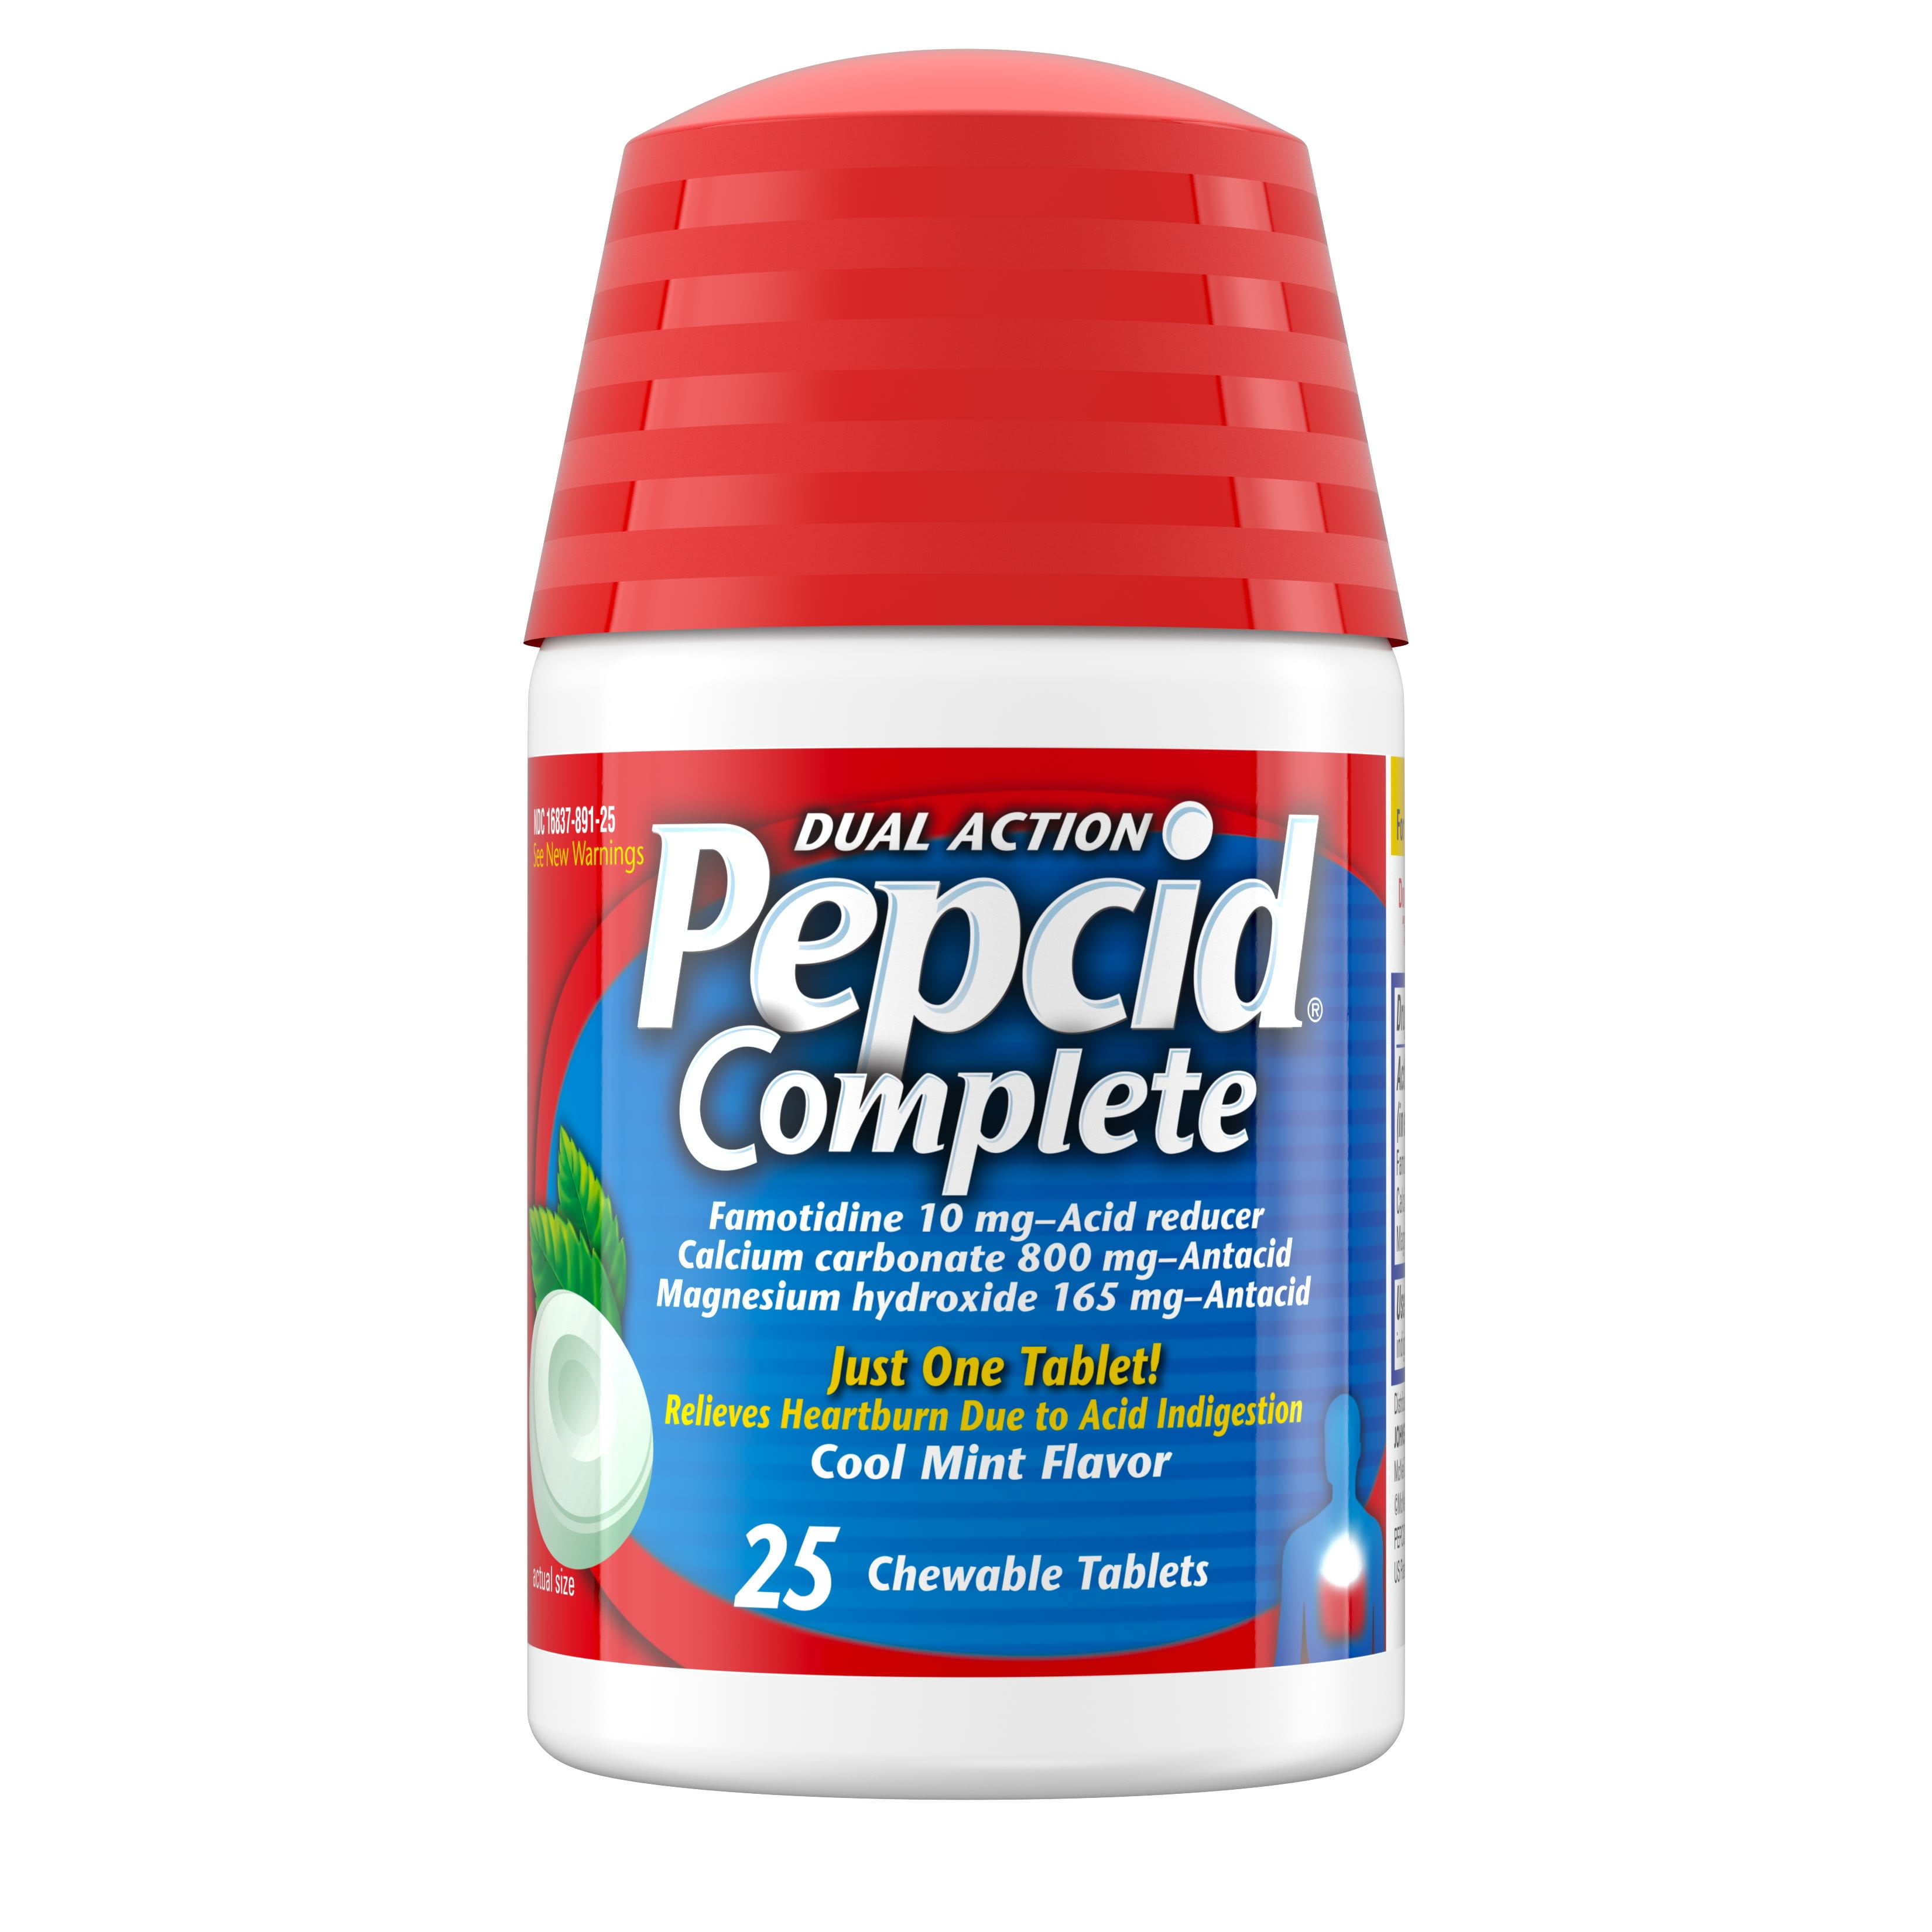 whats in pepcid complete